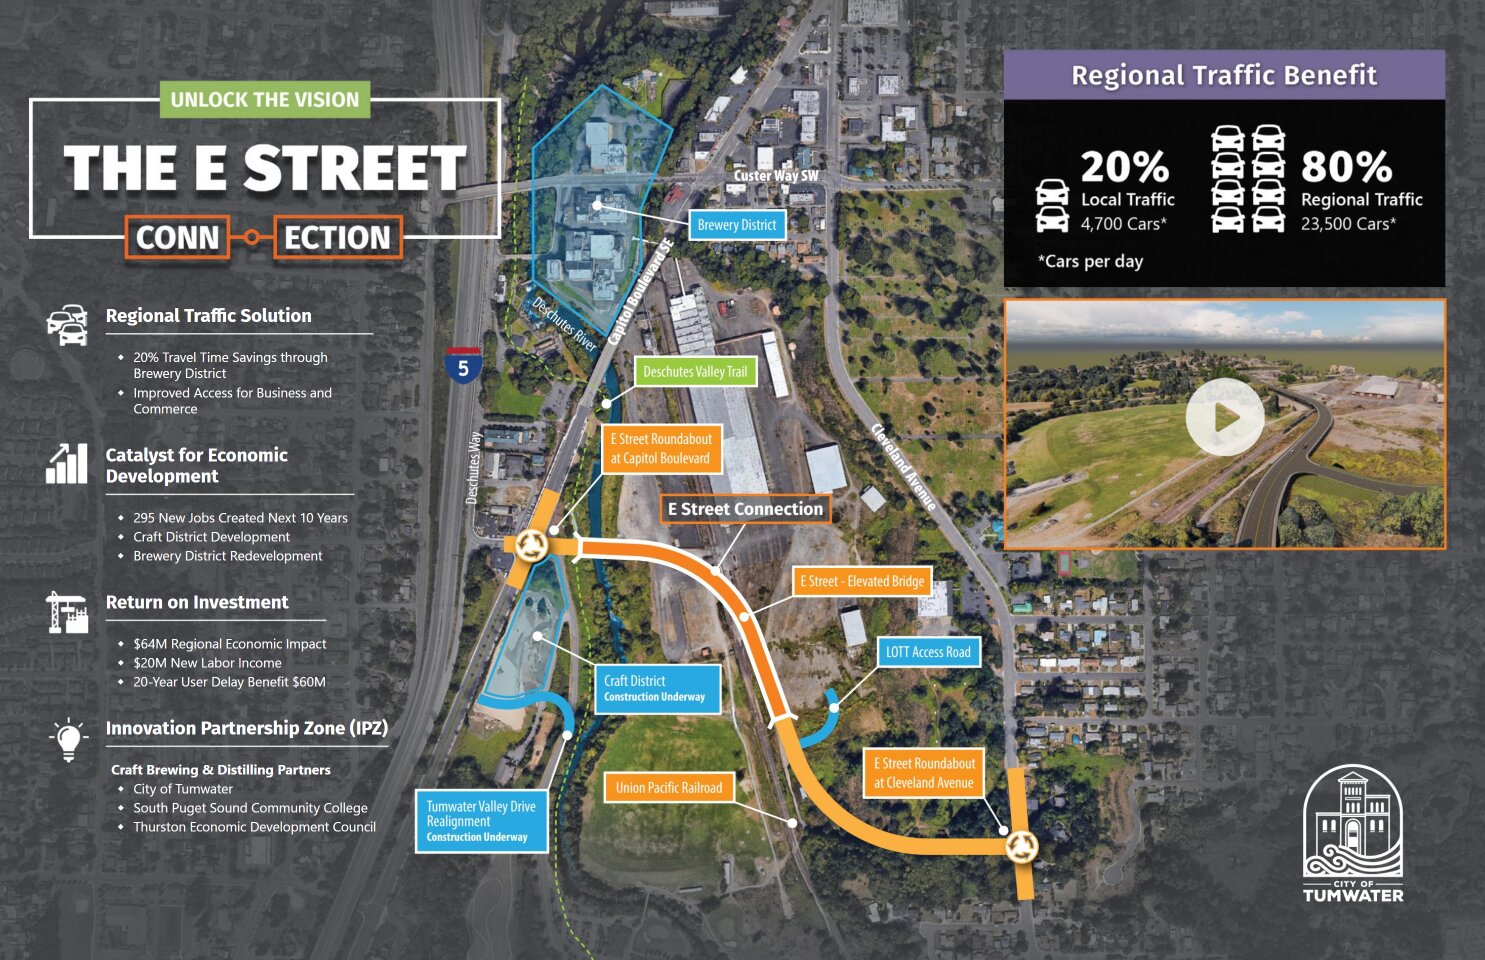 Tumwater’s website shows the possible routing of E Street extension which sees the extended road cutting through a forested hill.